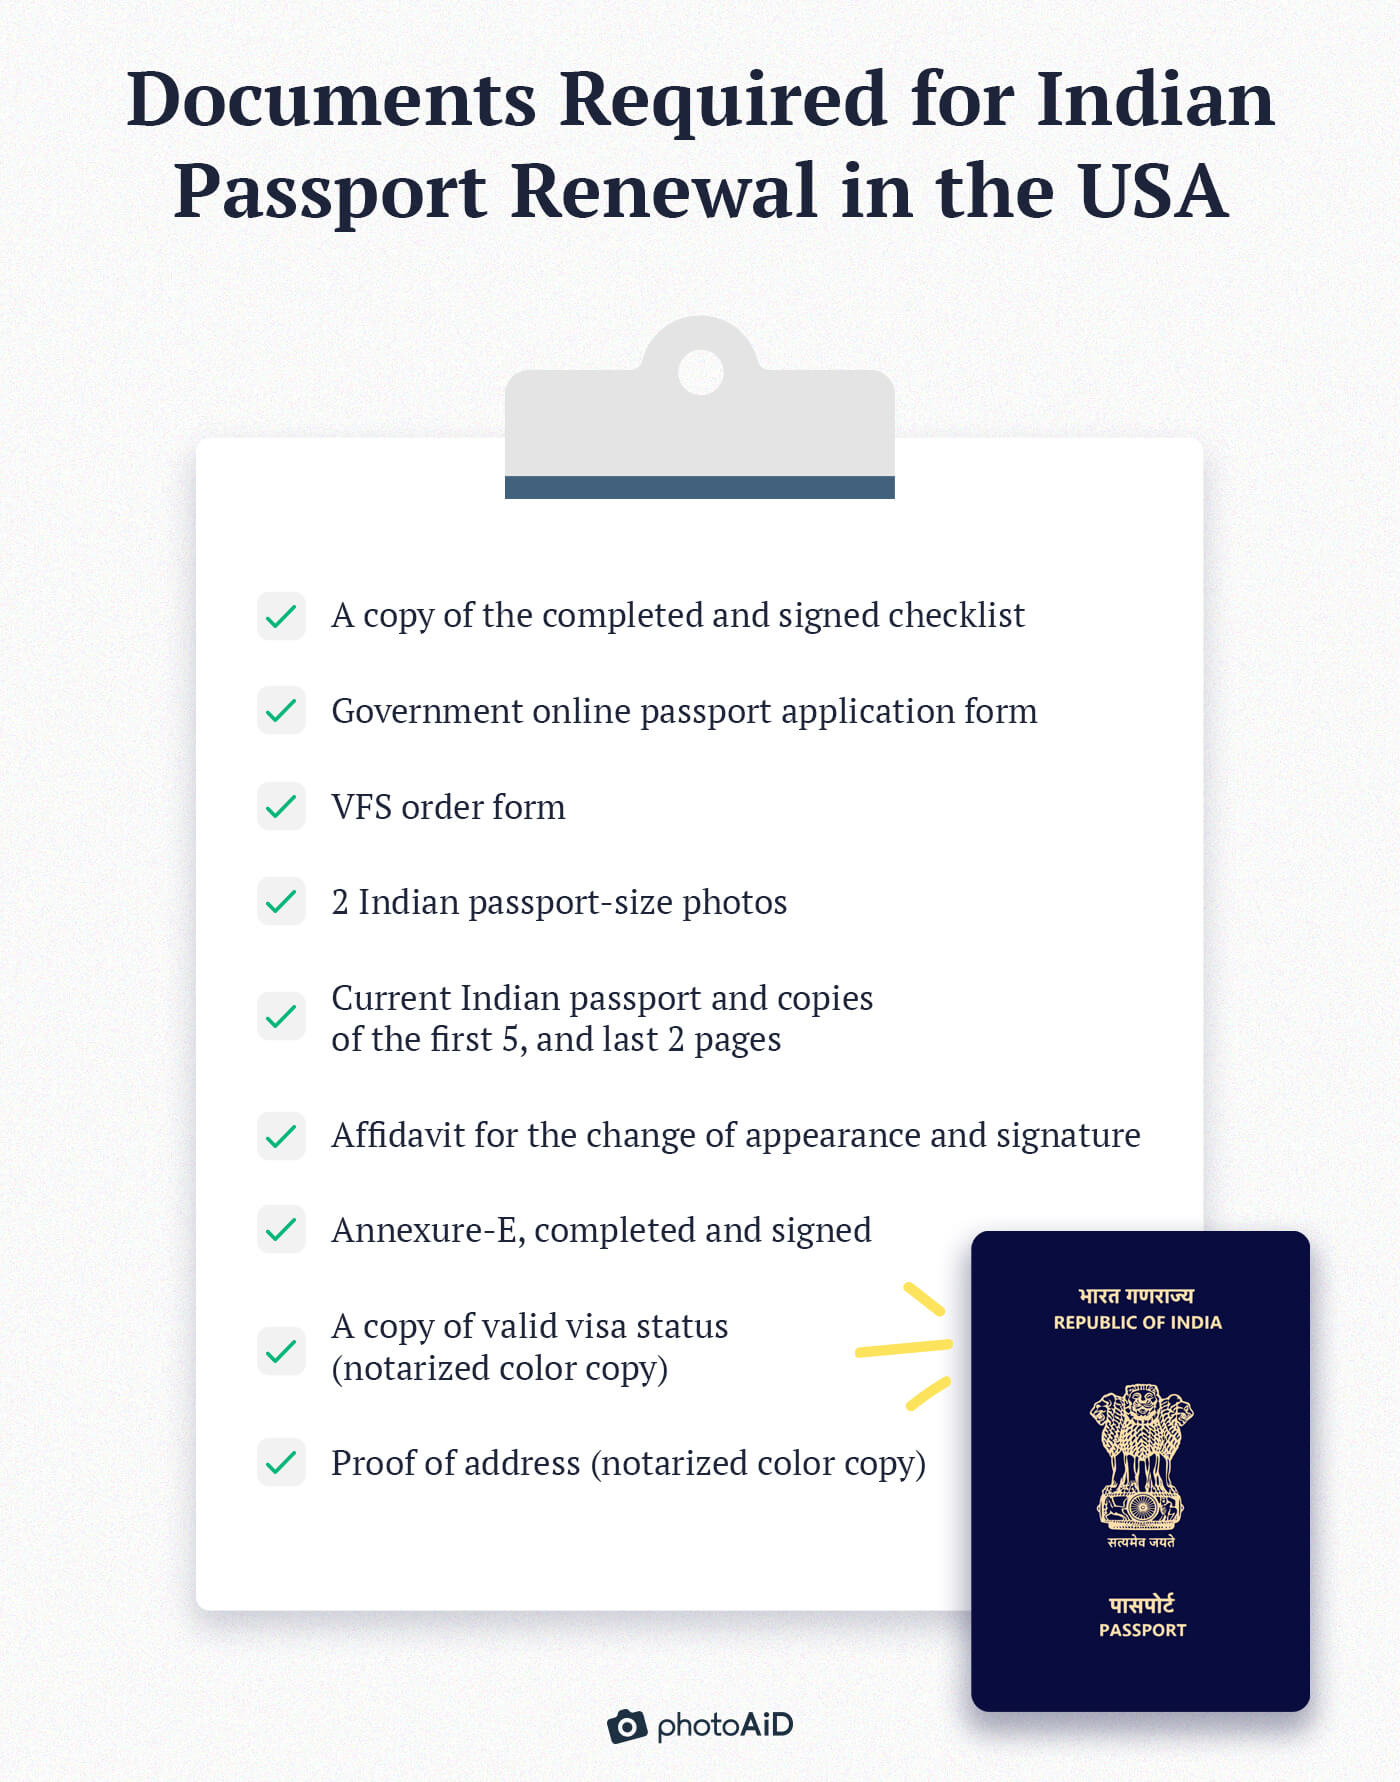 A list of the documents required for Indian passport renewal in the US.